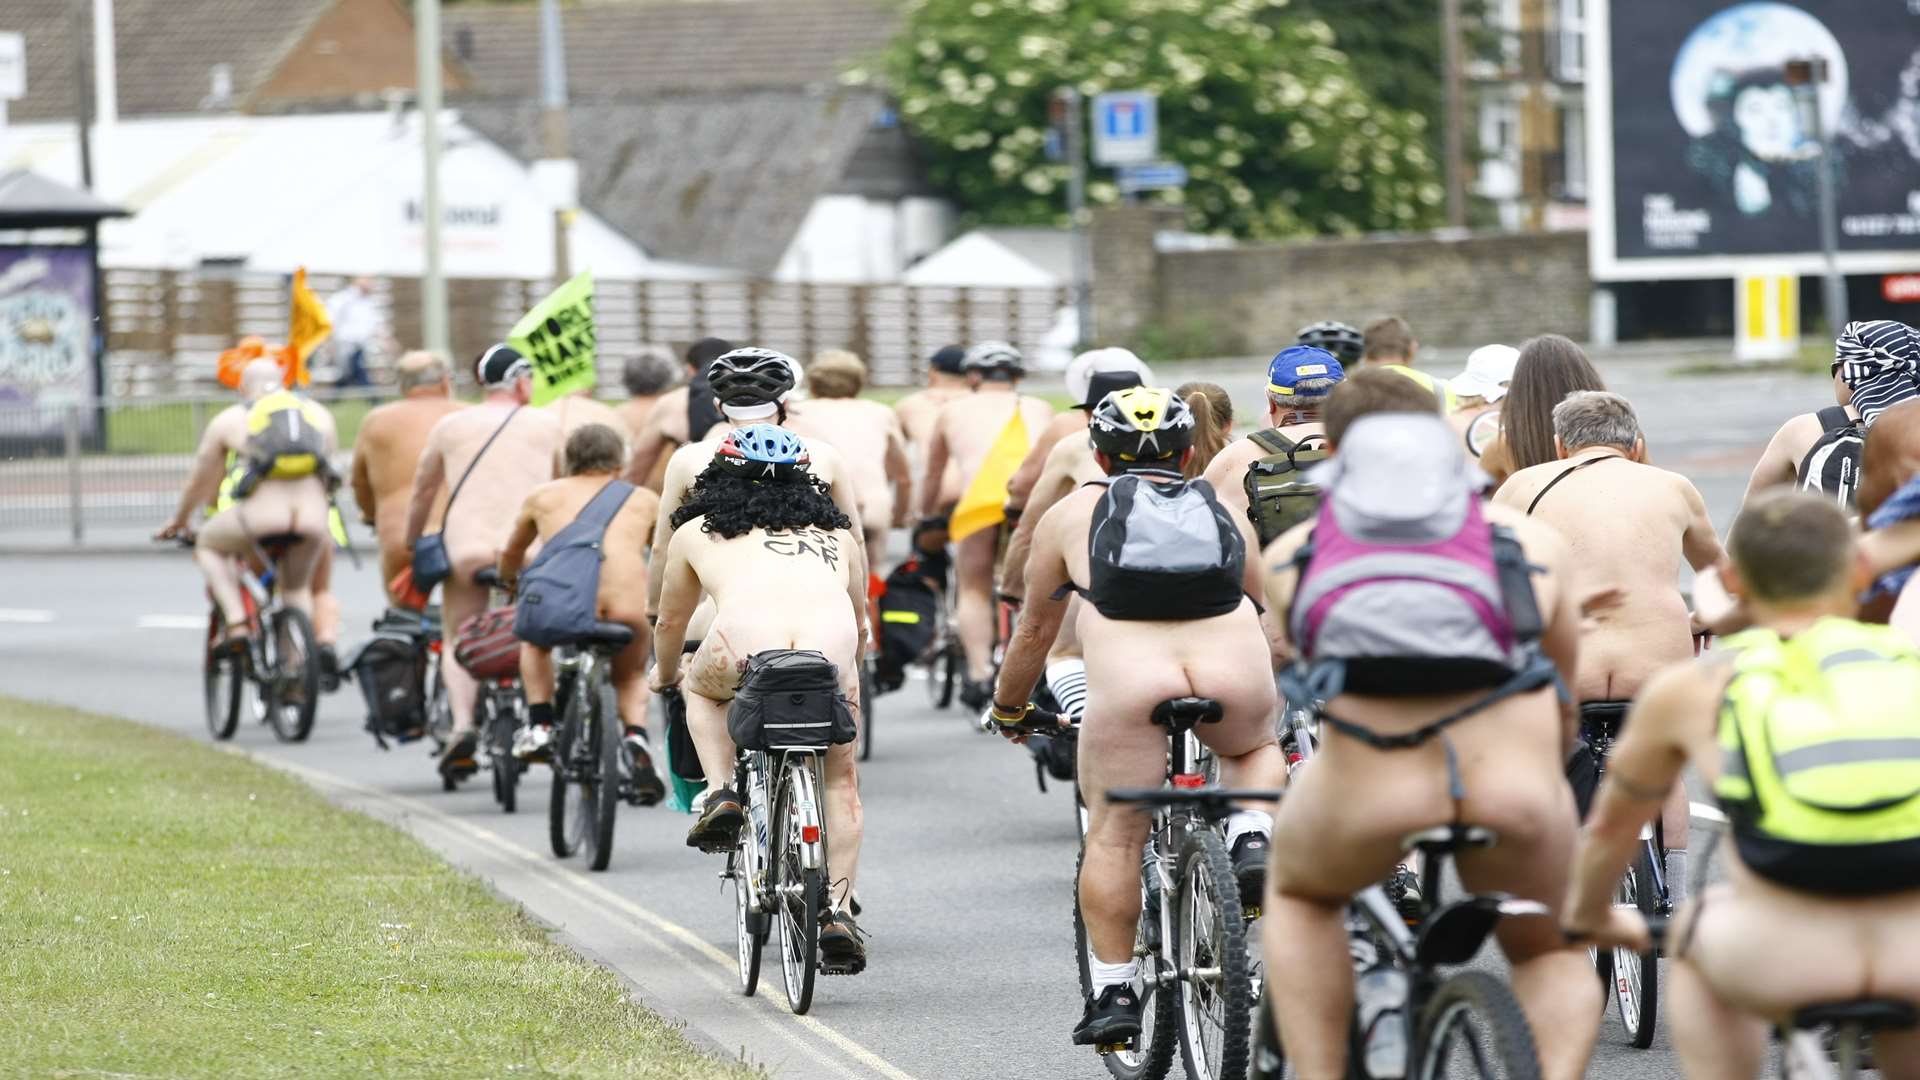 The World Naked Bike Ride is coming back to Canterbury